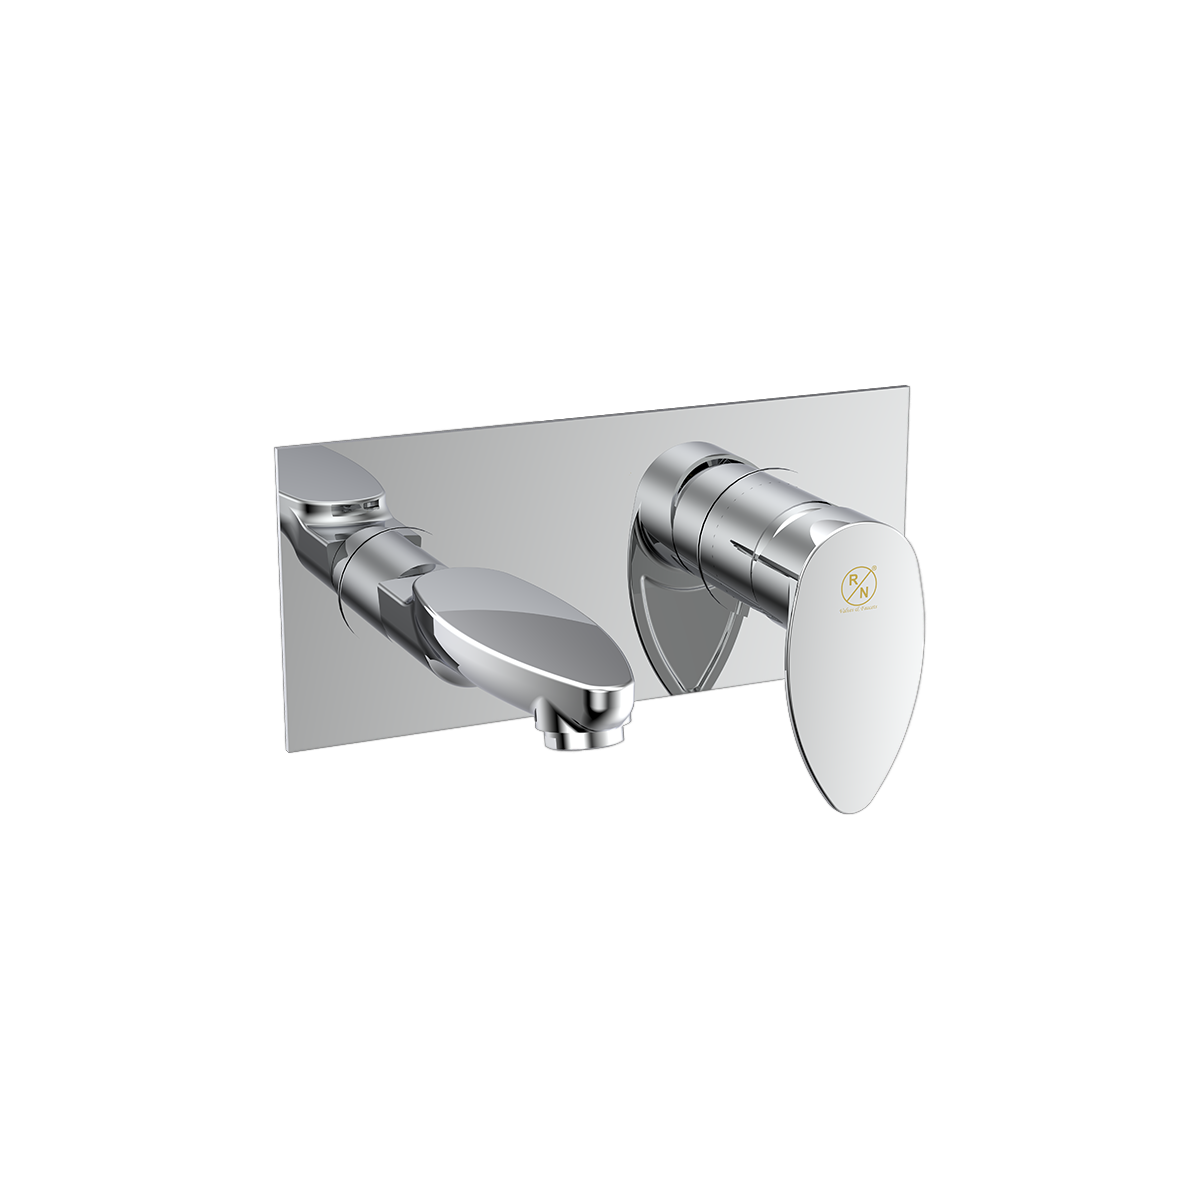 Single Lever Expose Part Kit Of Wall Mounted Basin Mixer(Consisting Of Operating Lever,Wall Flange & Spout Only)